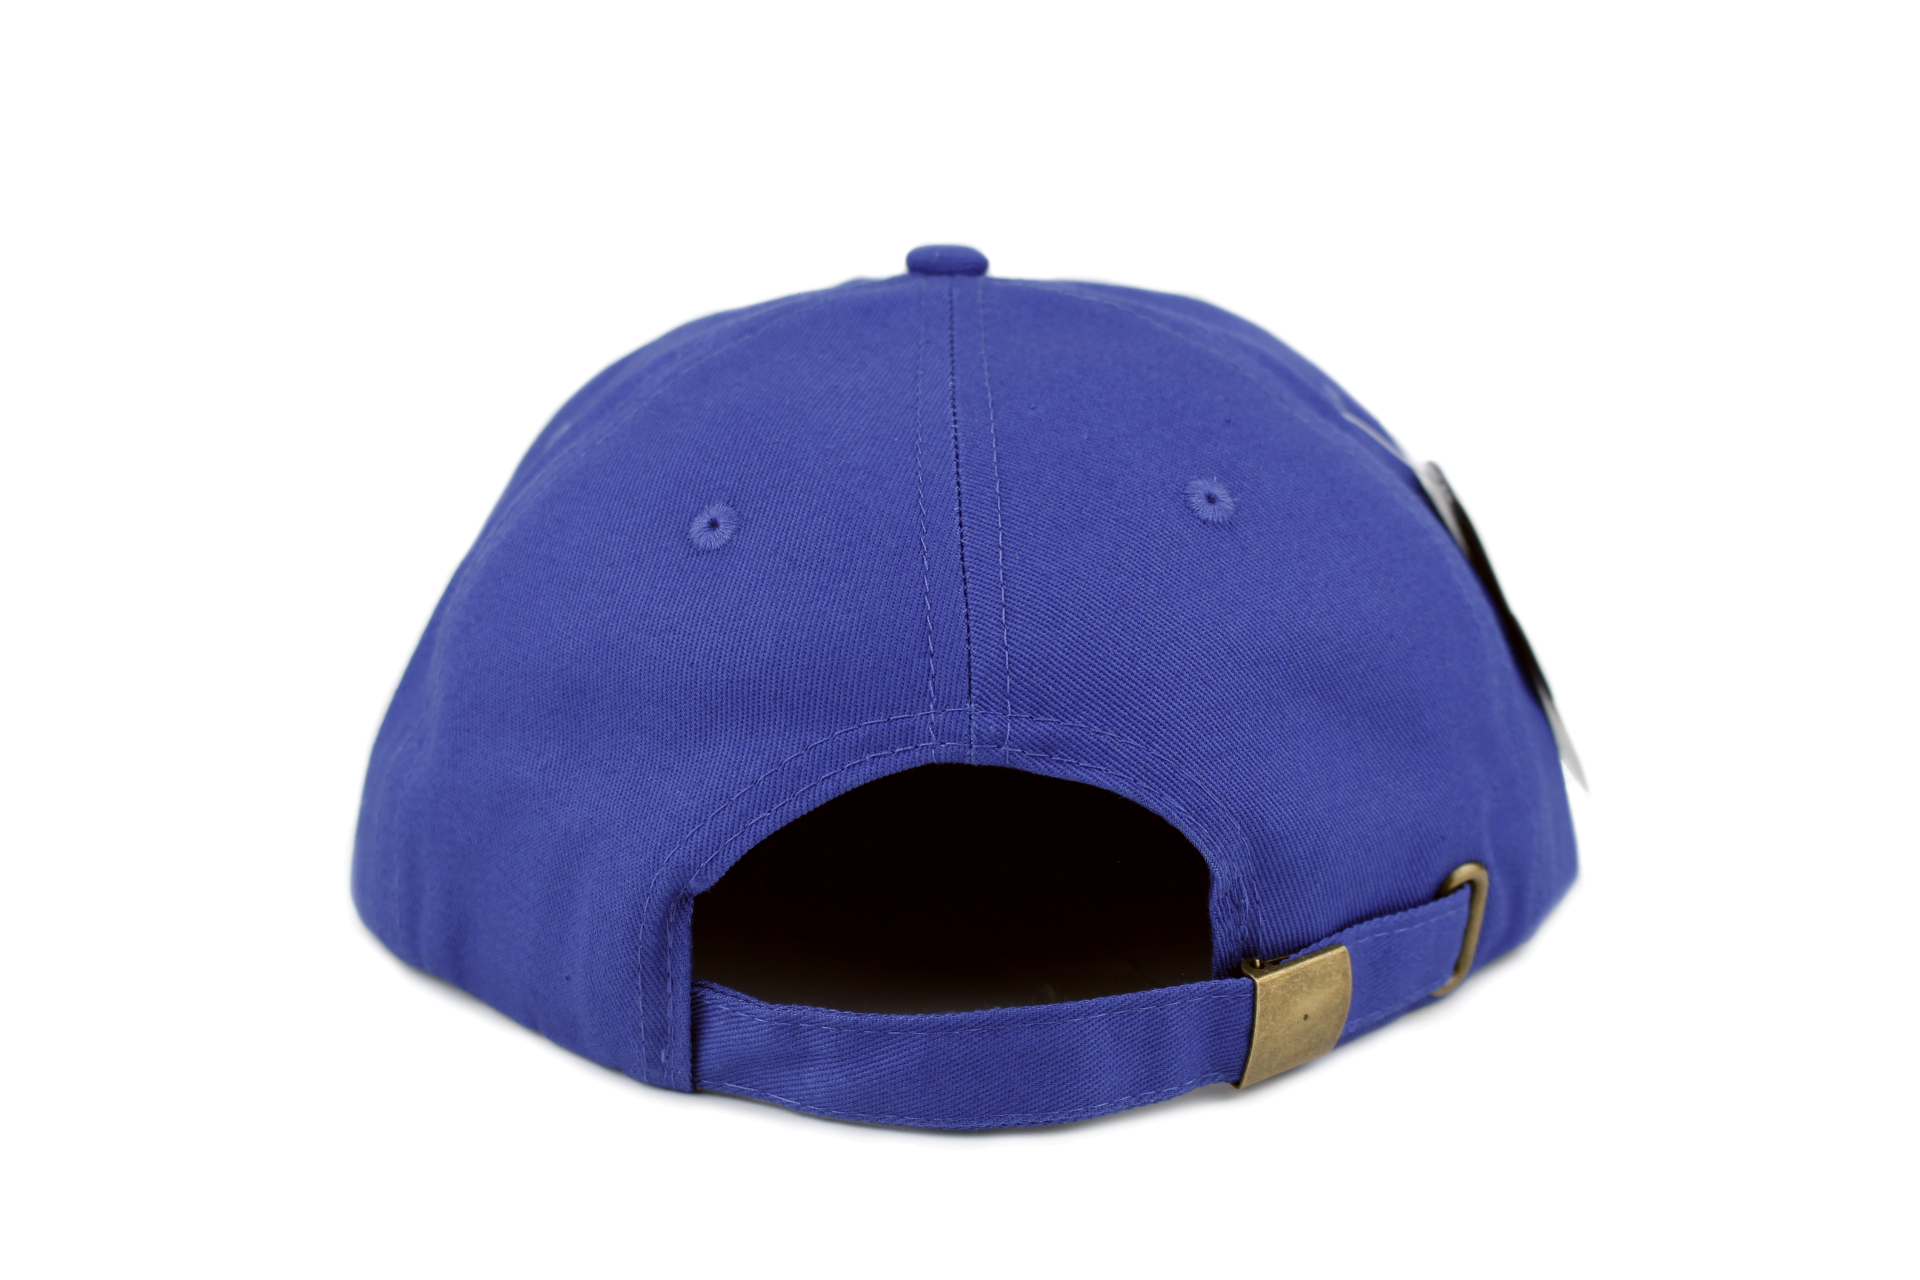 The Easy - 100% Cotton - Royal Blue